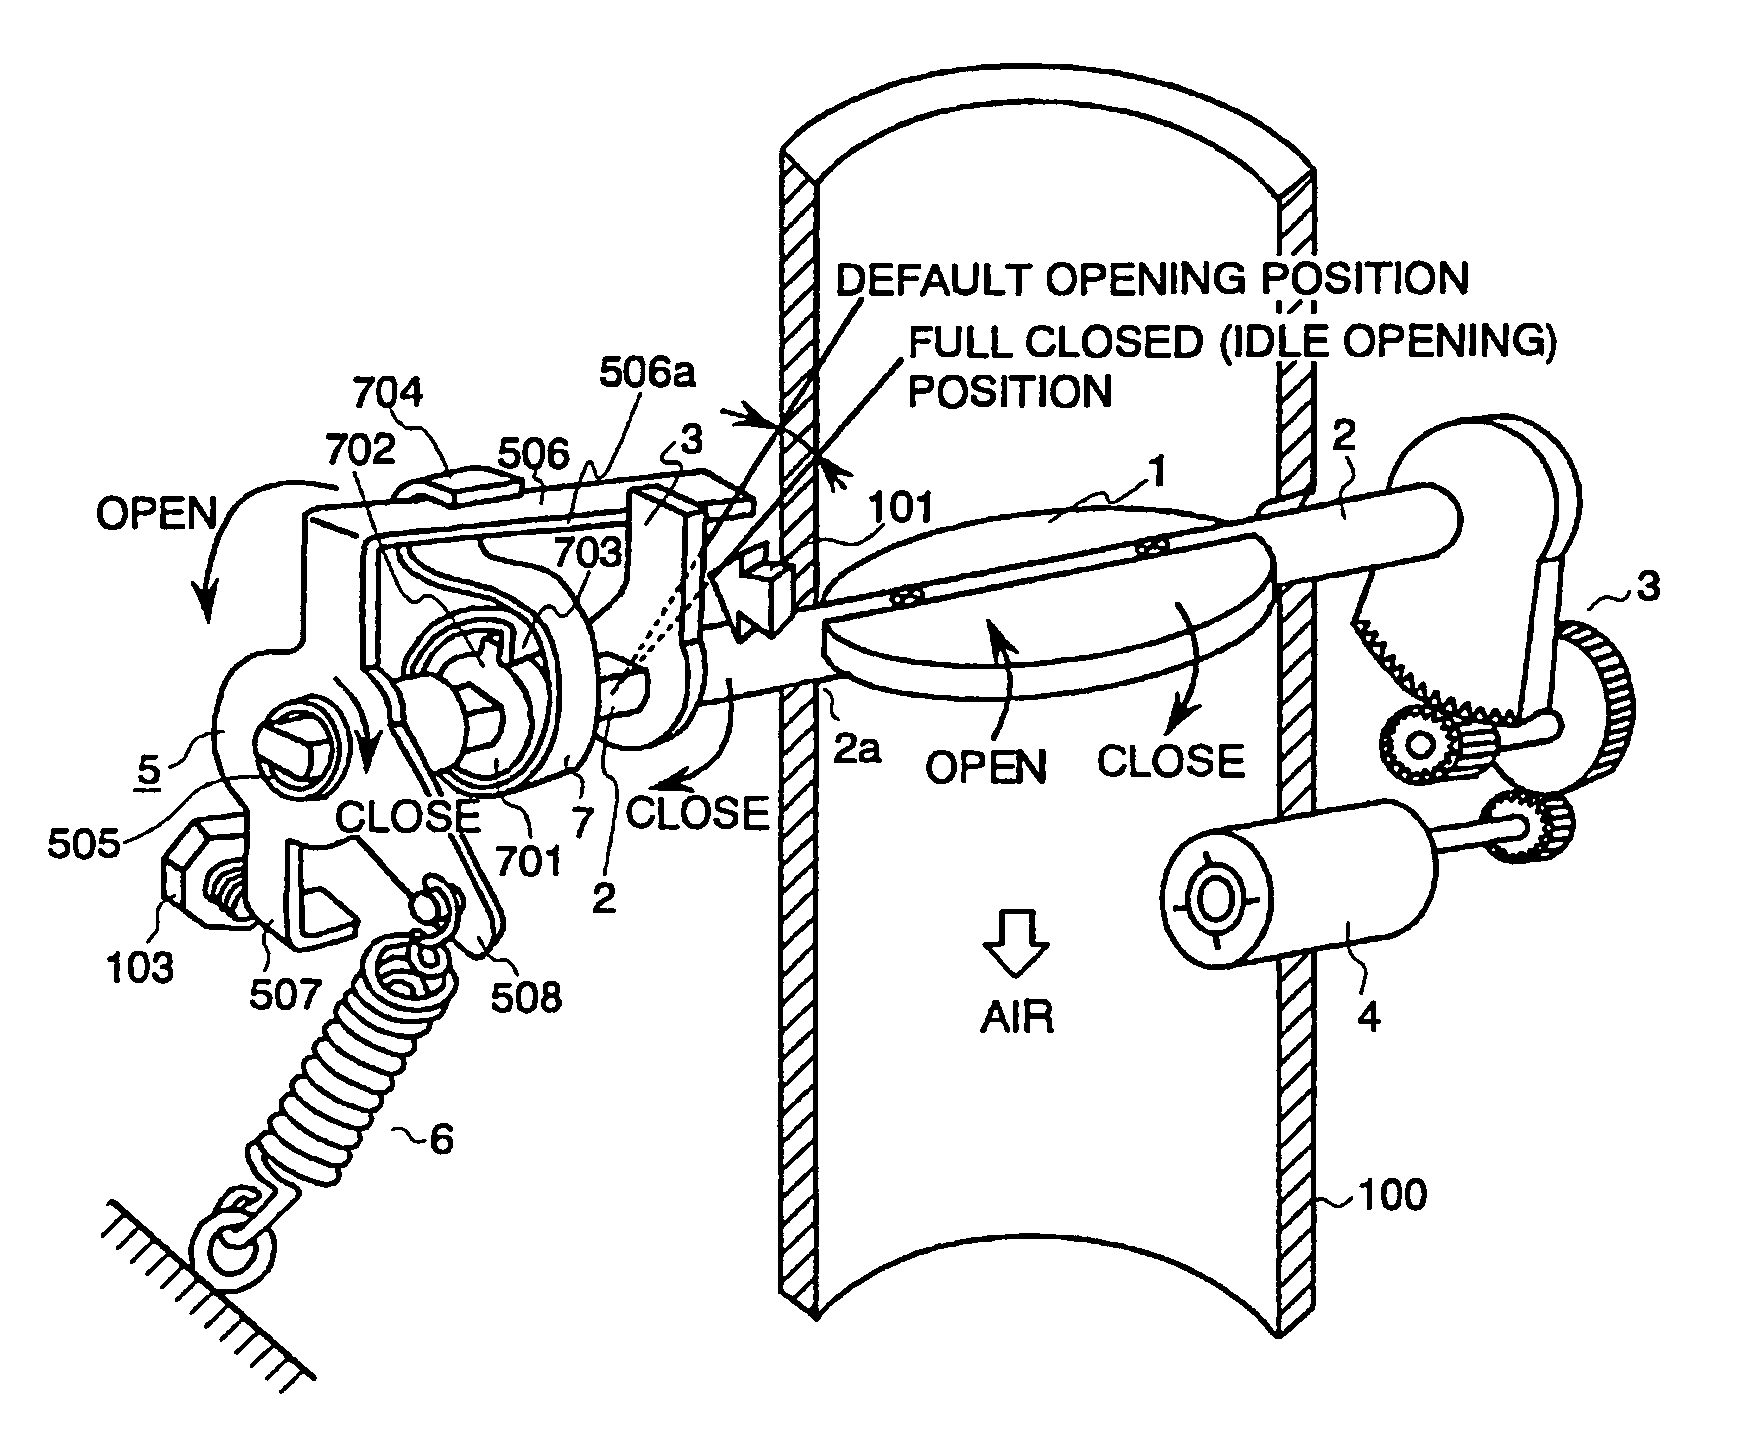 Throttle valve control device for an internal combustion engine